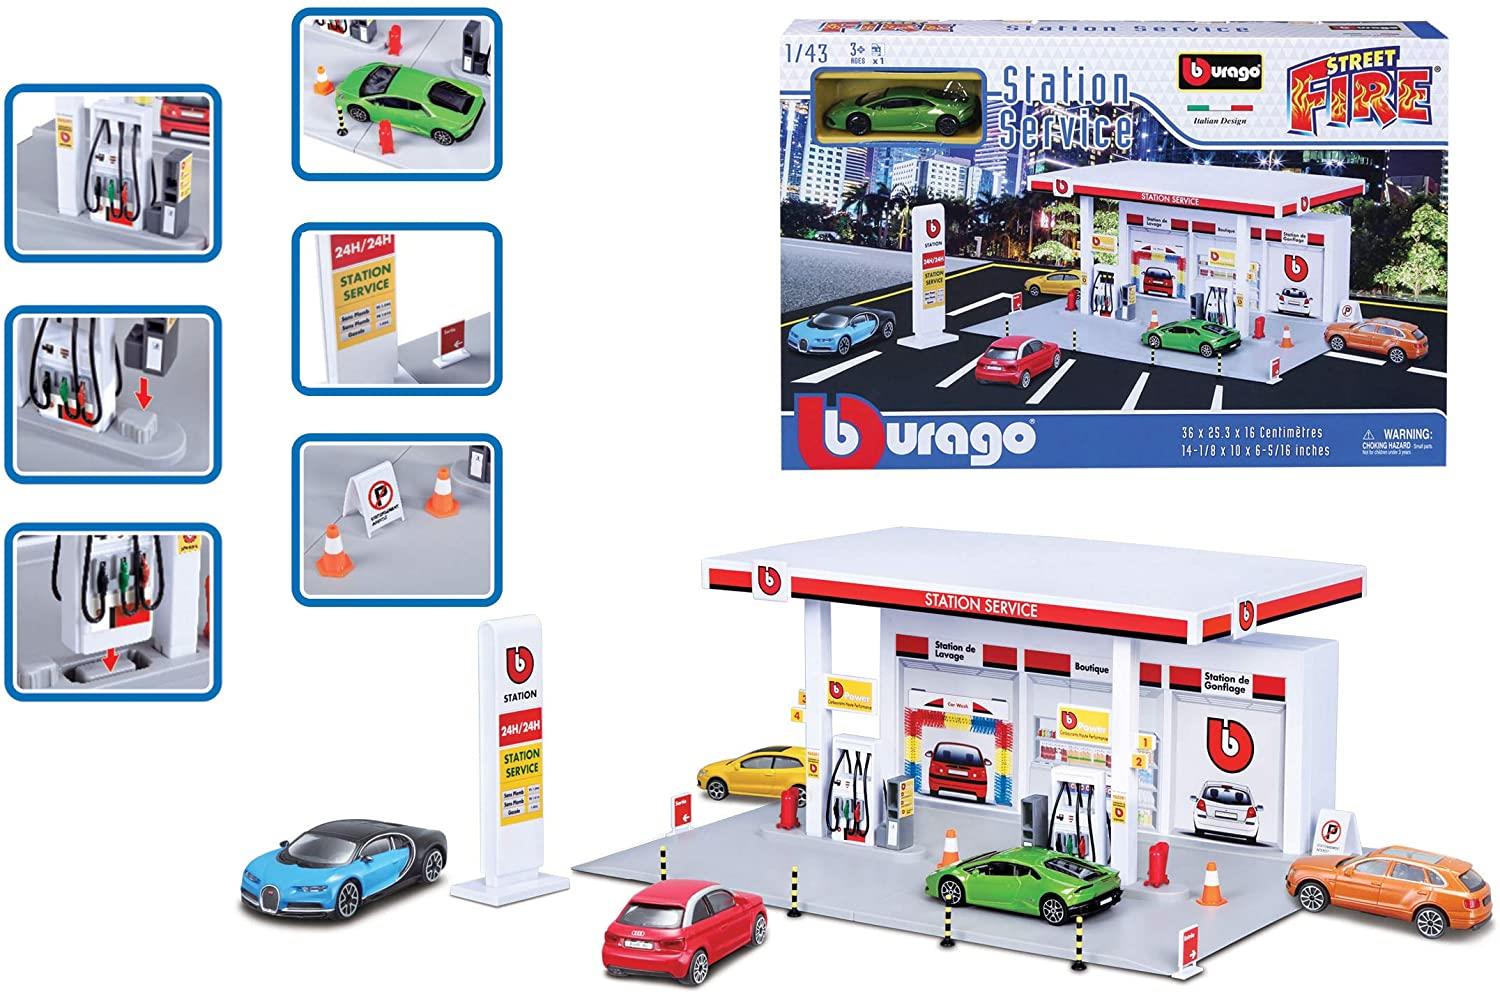 Bburago 1 43 Street Fire Bburage City Police Station Inc 1 Car Toy Gift 31505 for sale online 